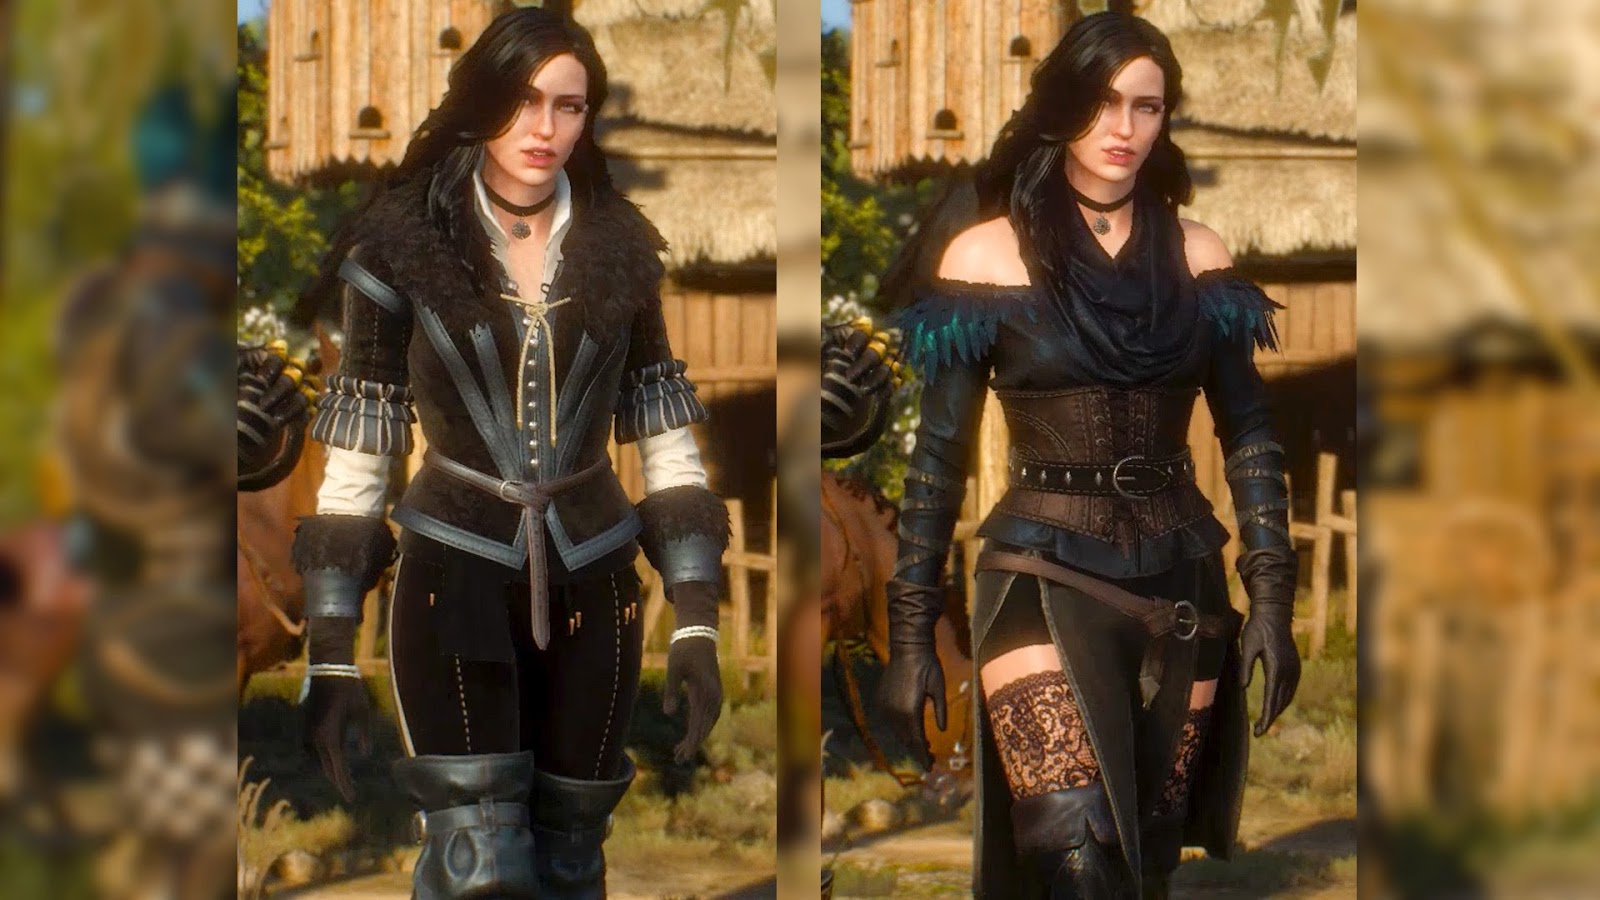 Yennefer of vengerberg the witcher 3 voiced standalone follower фото 58